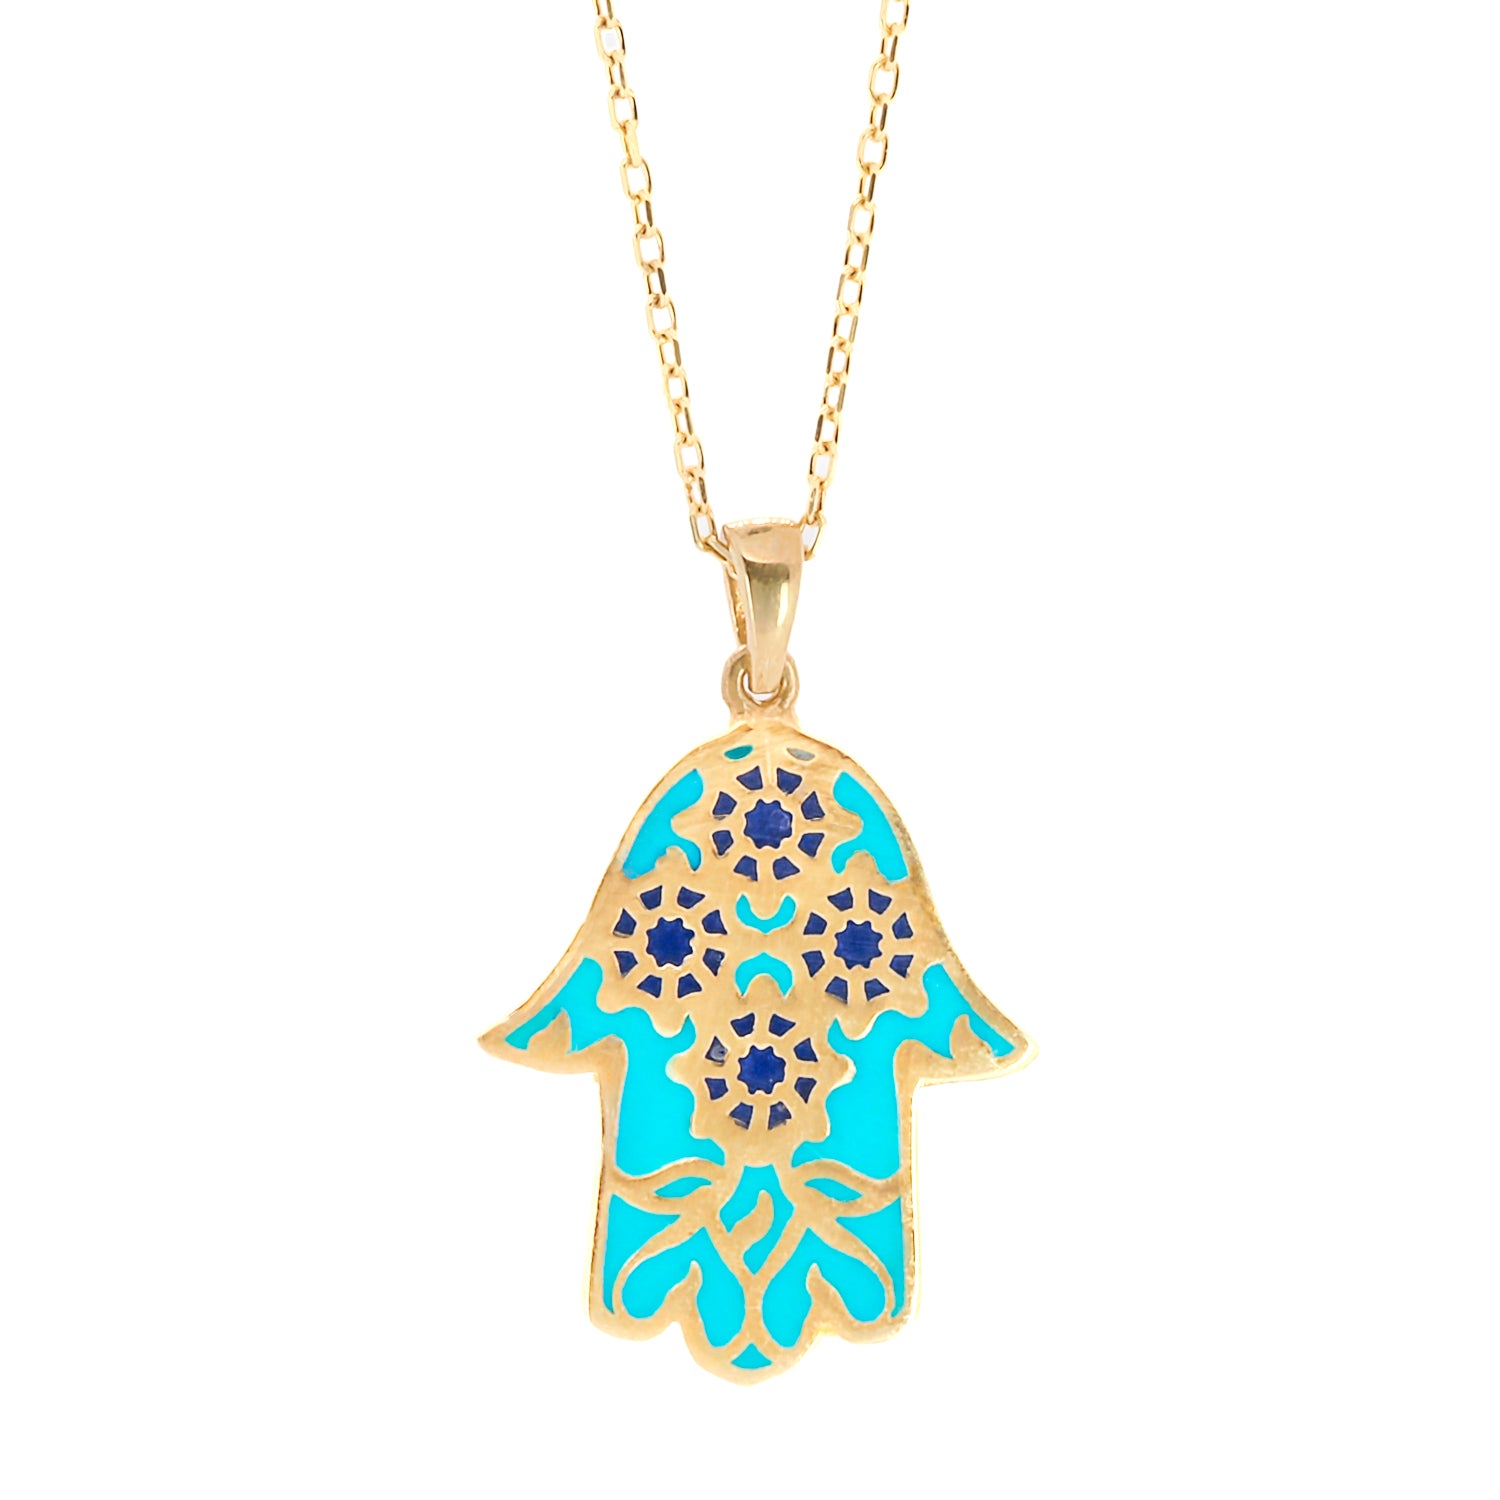 A close-up of the intricate gold plating and vibrant turquoise enamel on the Hamsa pendant.